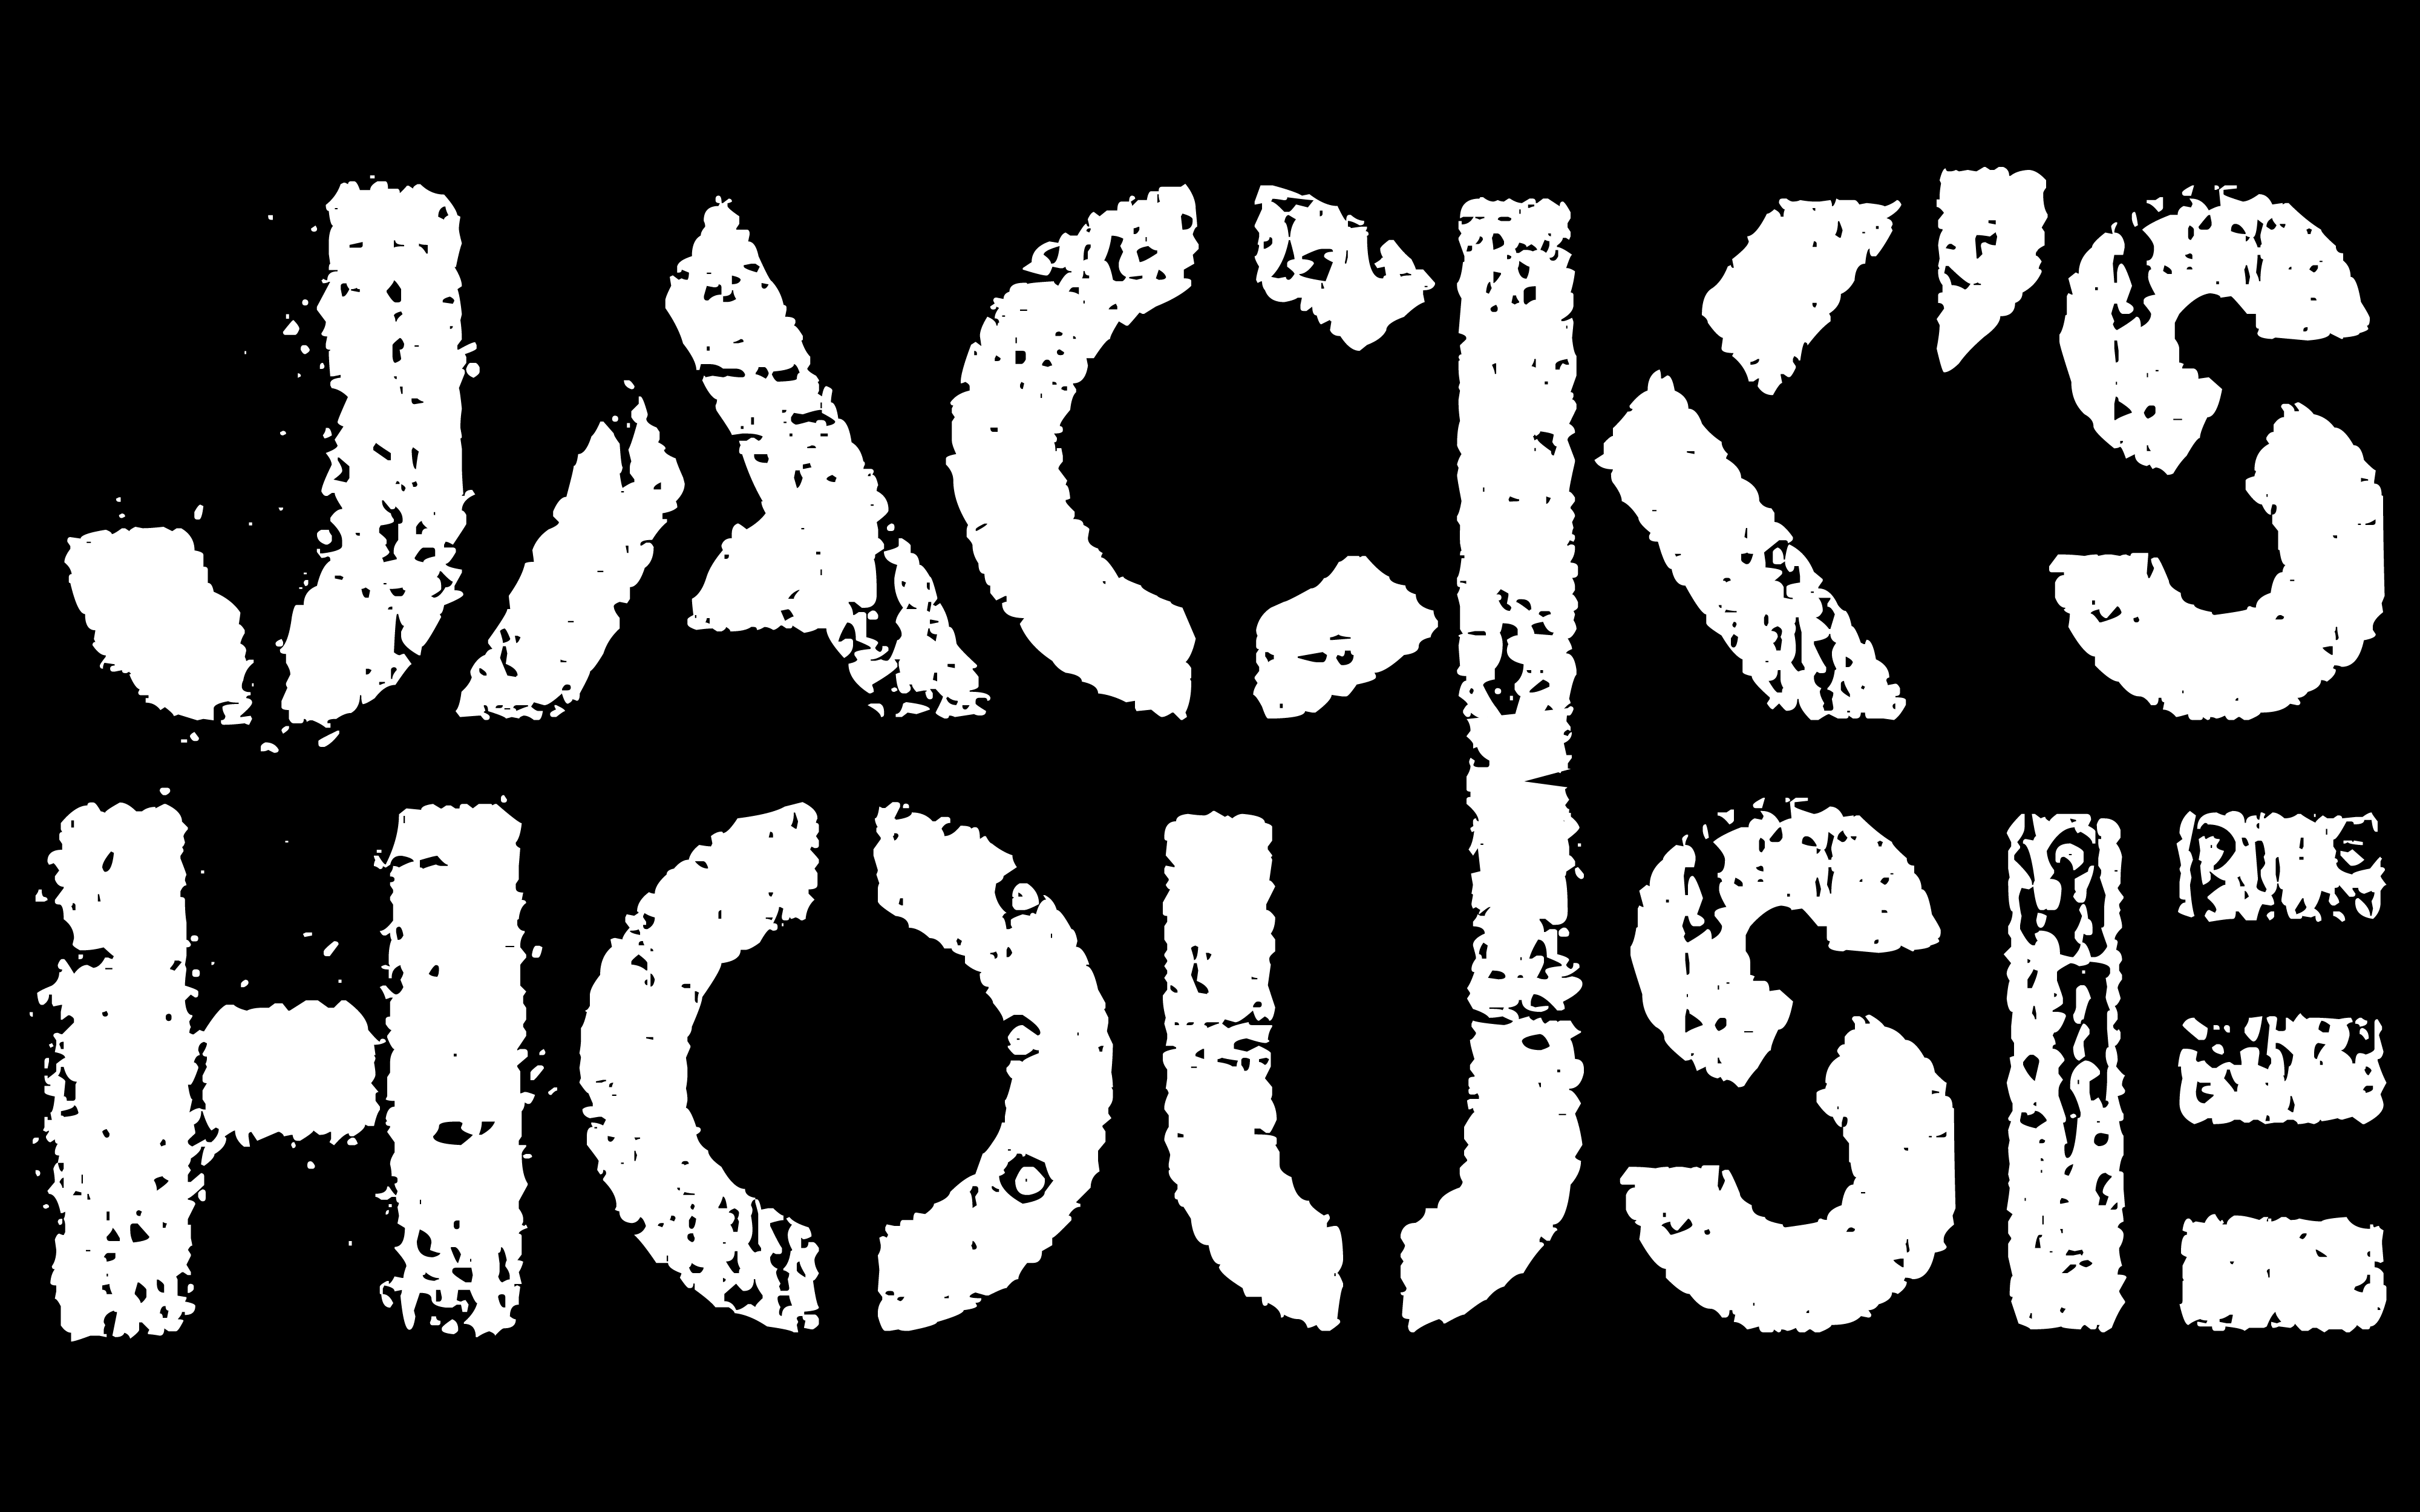 CLICK OR TAP IMAGE TO STREAM MUSIC FROM JACK'S HOUSE RECORDINGS ON SOUNDCLOUD